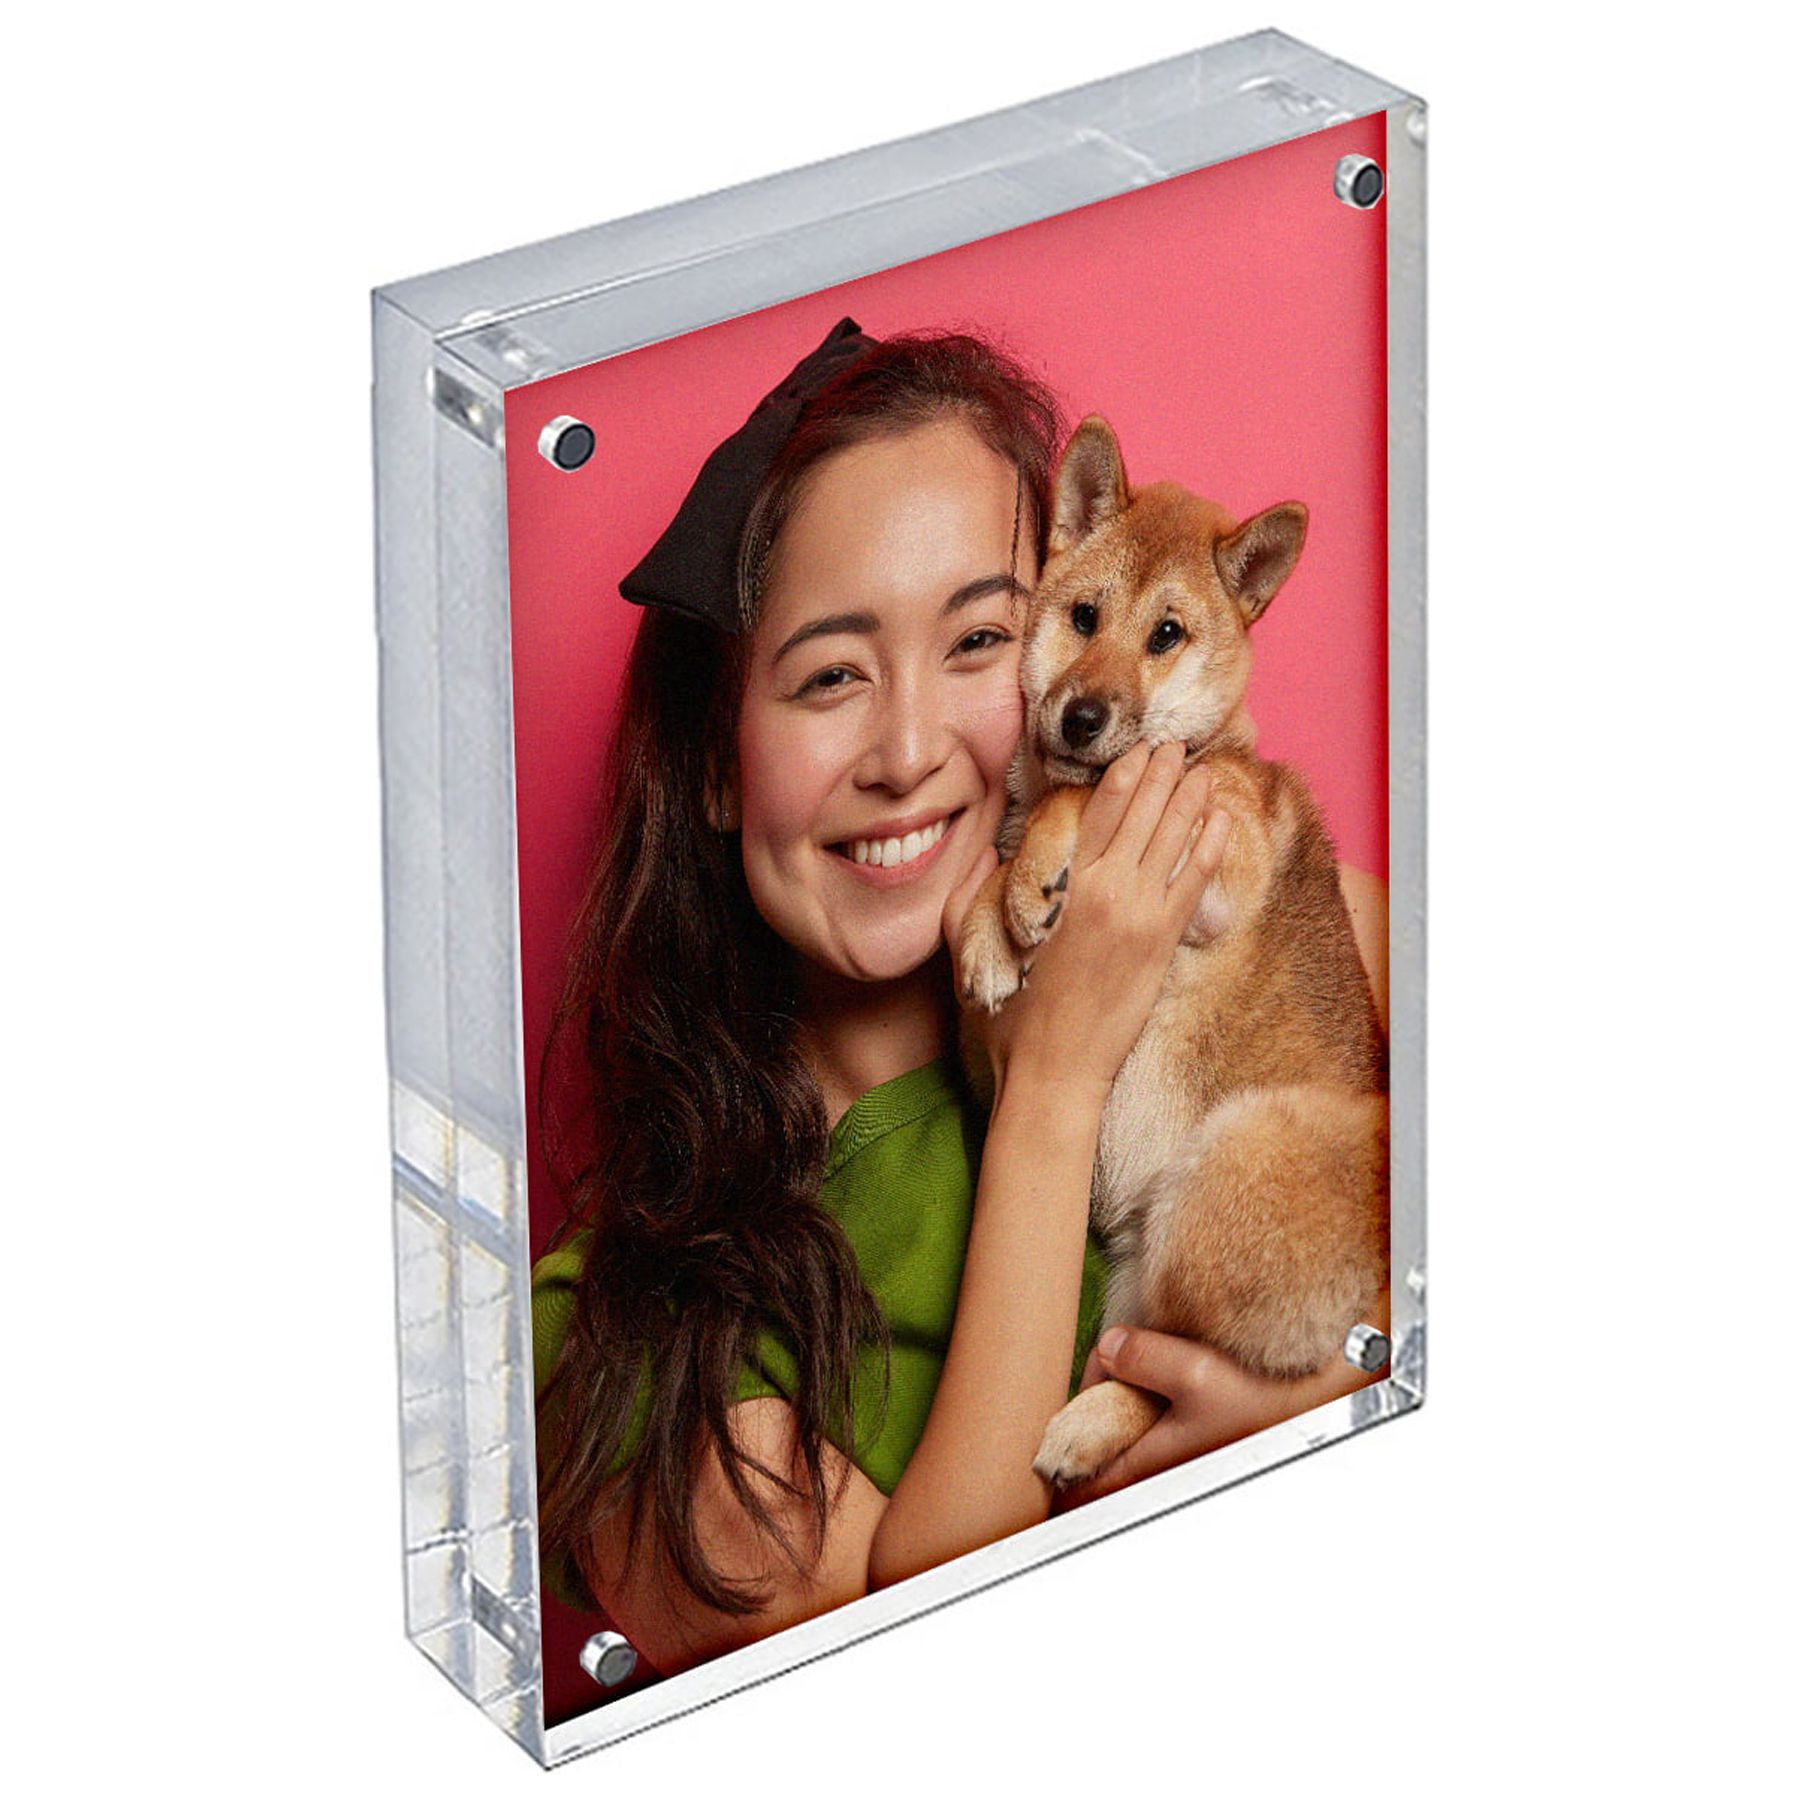 Azar Displays Clear Acrylic Magnetic Photo Block Frame Set with 4x6 and 5x7  size Frames